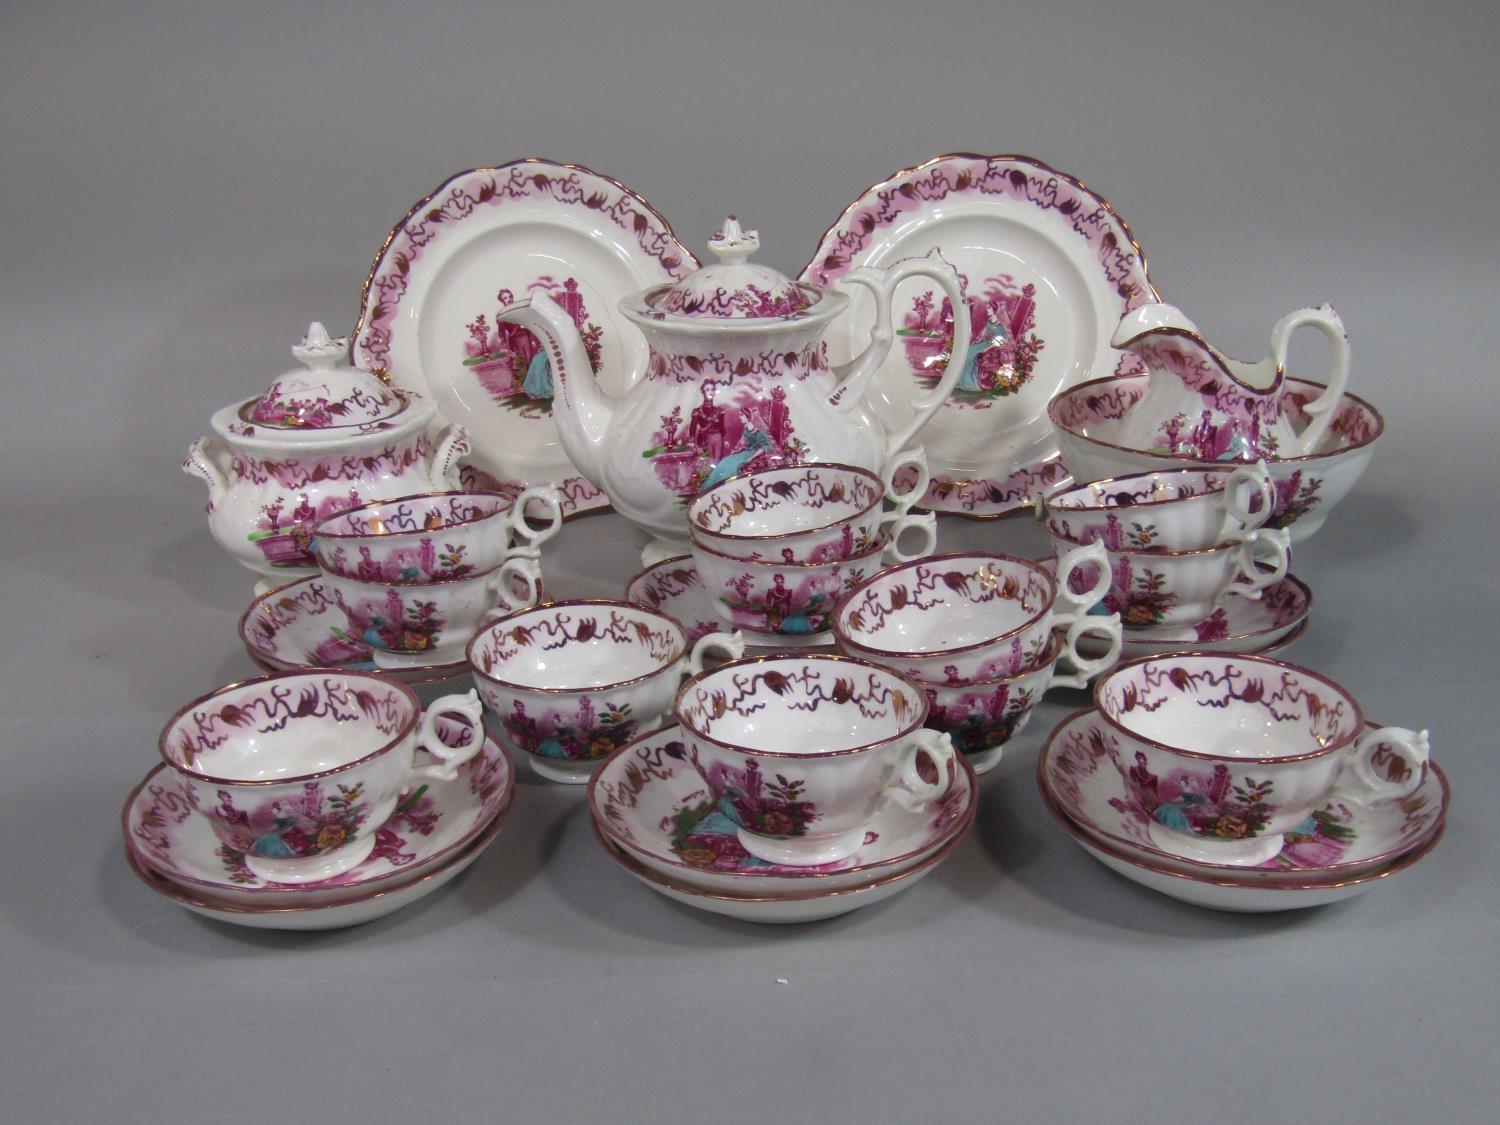 A collection of early Victorian teawares probably commemorating the marriage of Victoria and Albert,